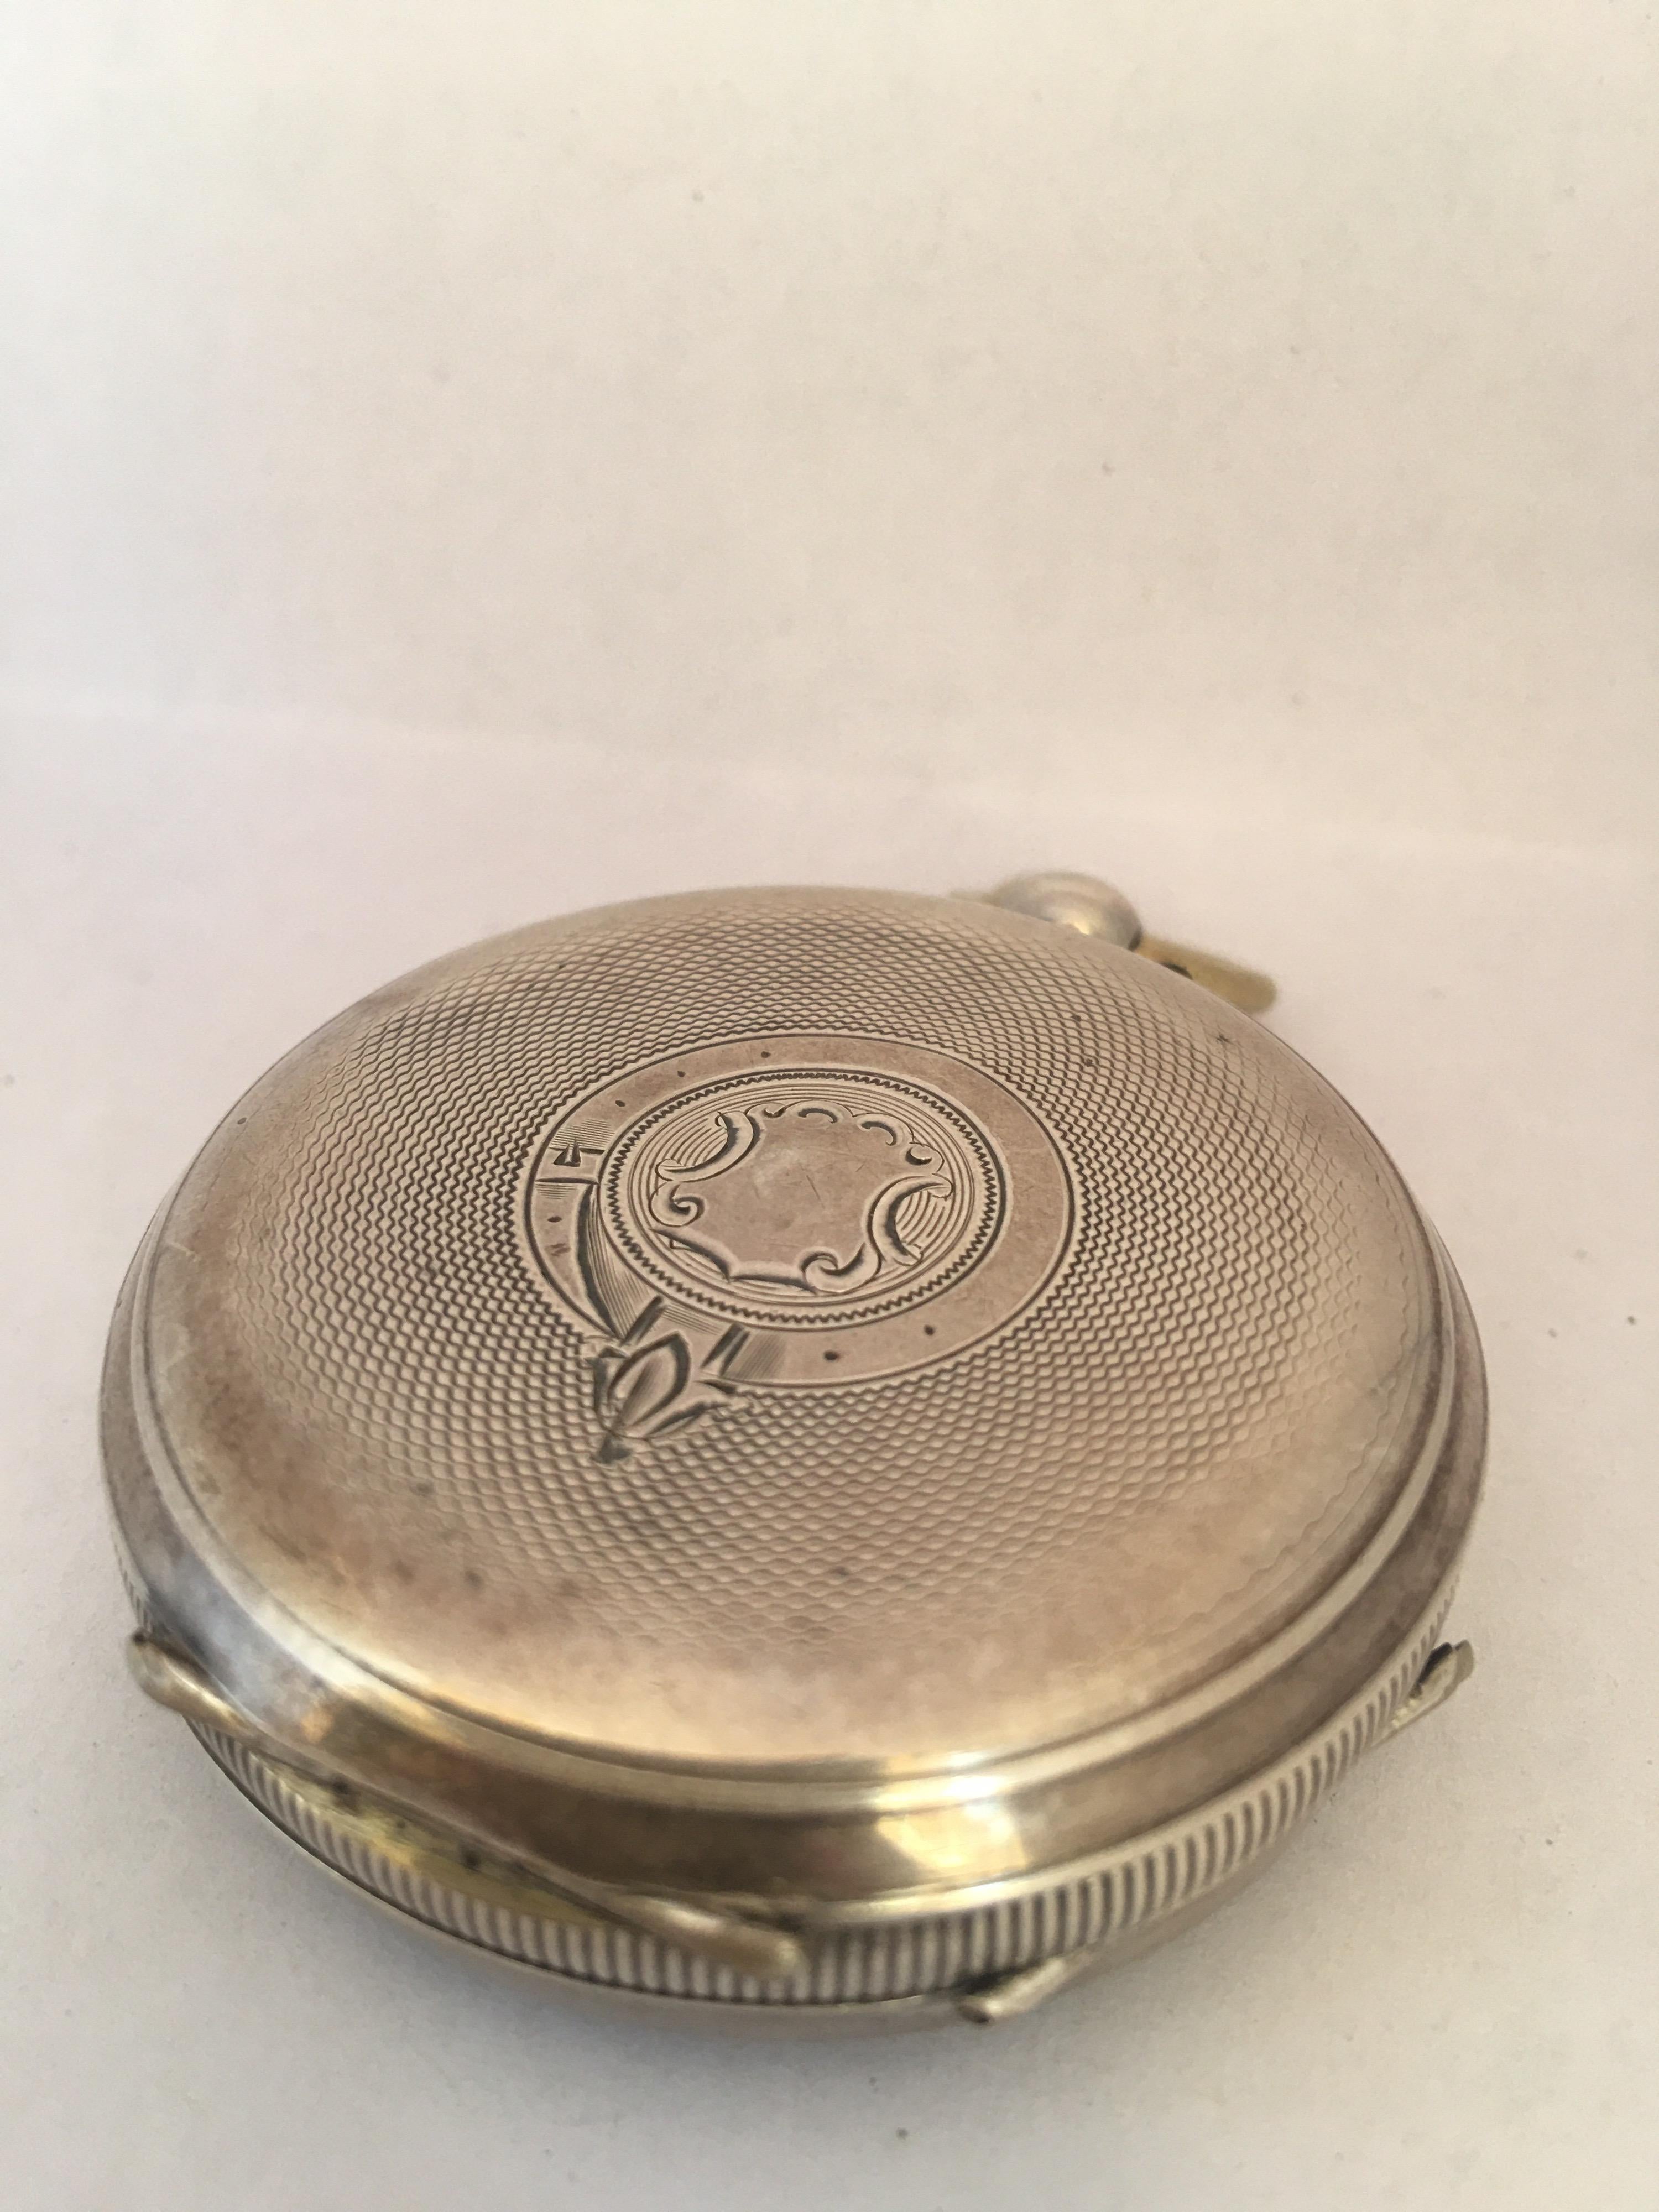 Antique Silver Key-Winding Pocket Watch Signed Acme Lever H. Samuel Manchester 6